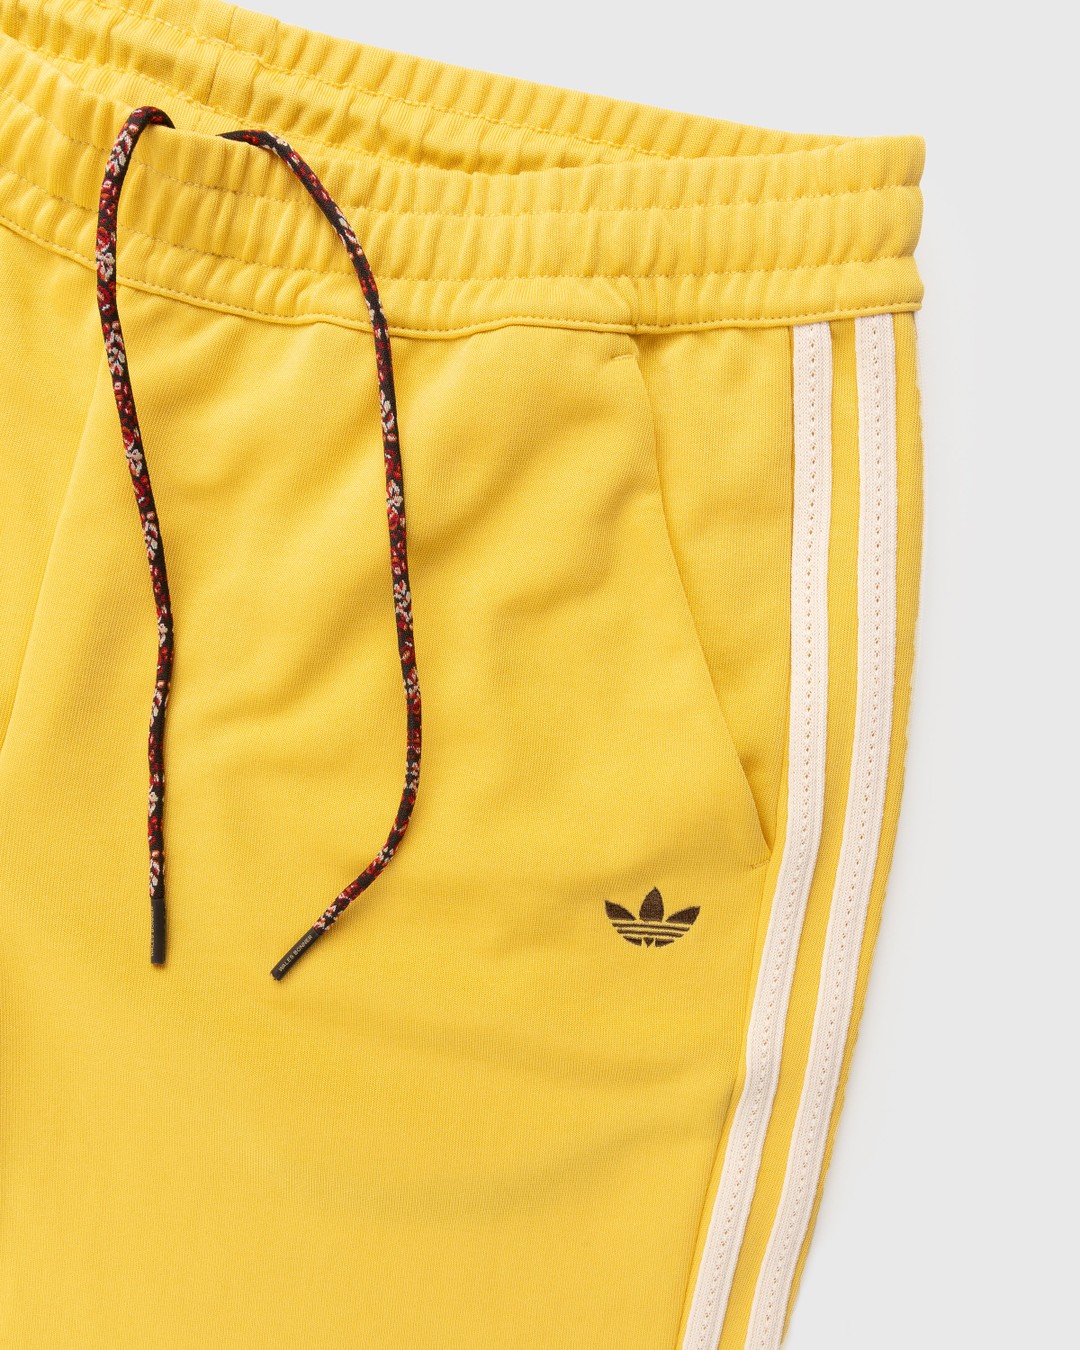 Adidas x Wales Bonner – WB Track Pants St Fade Gold | Highsnobiety